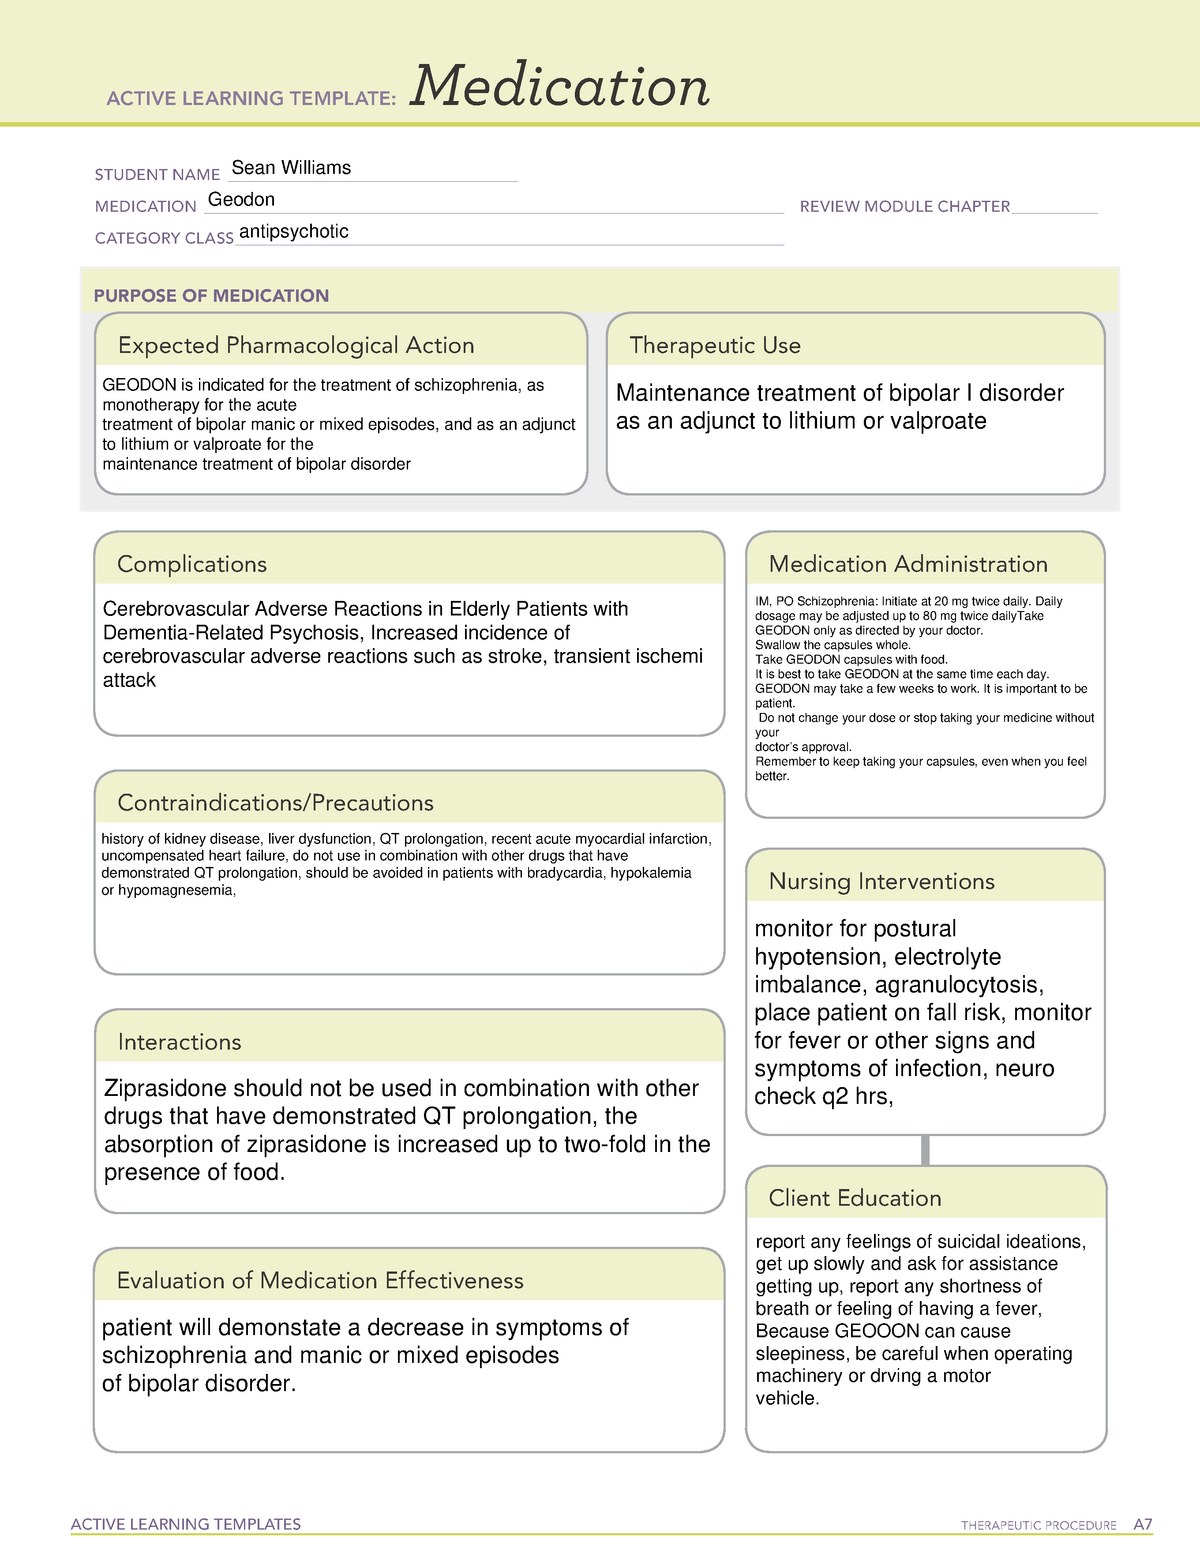 ati-medication-template-geodon-active-learning-templates-therapeutic-procedure-a-medication